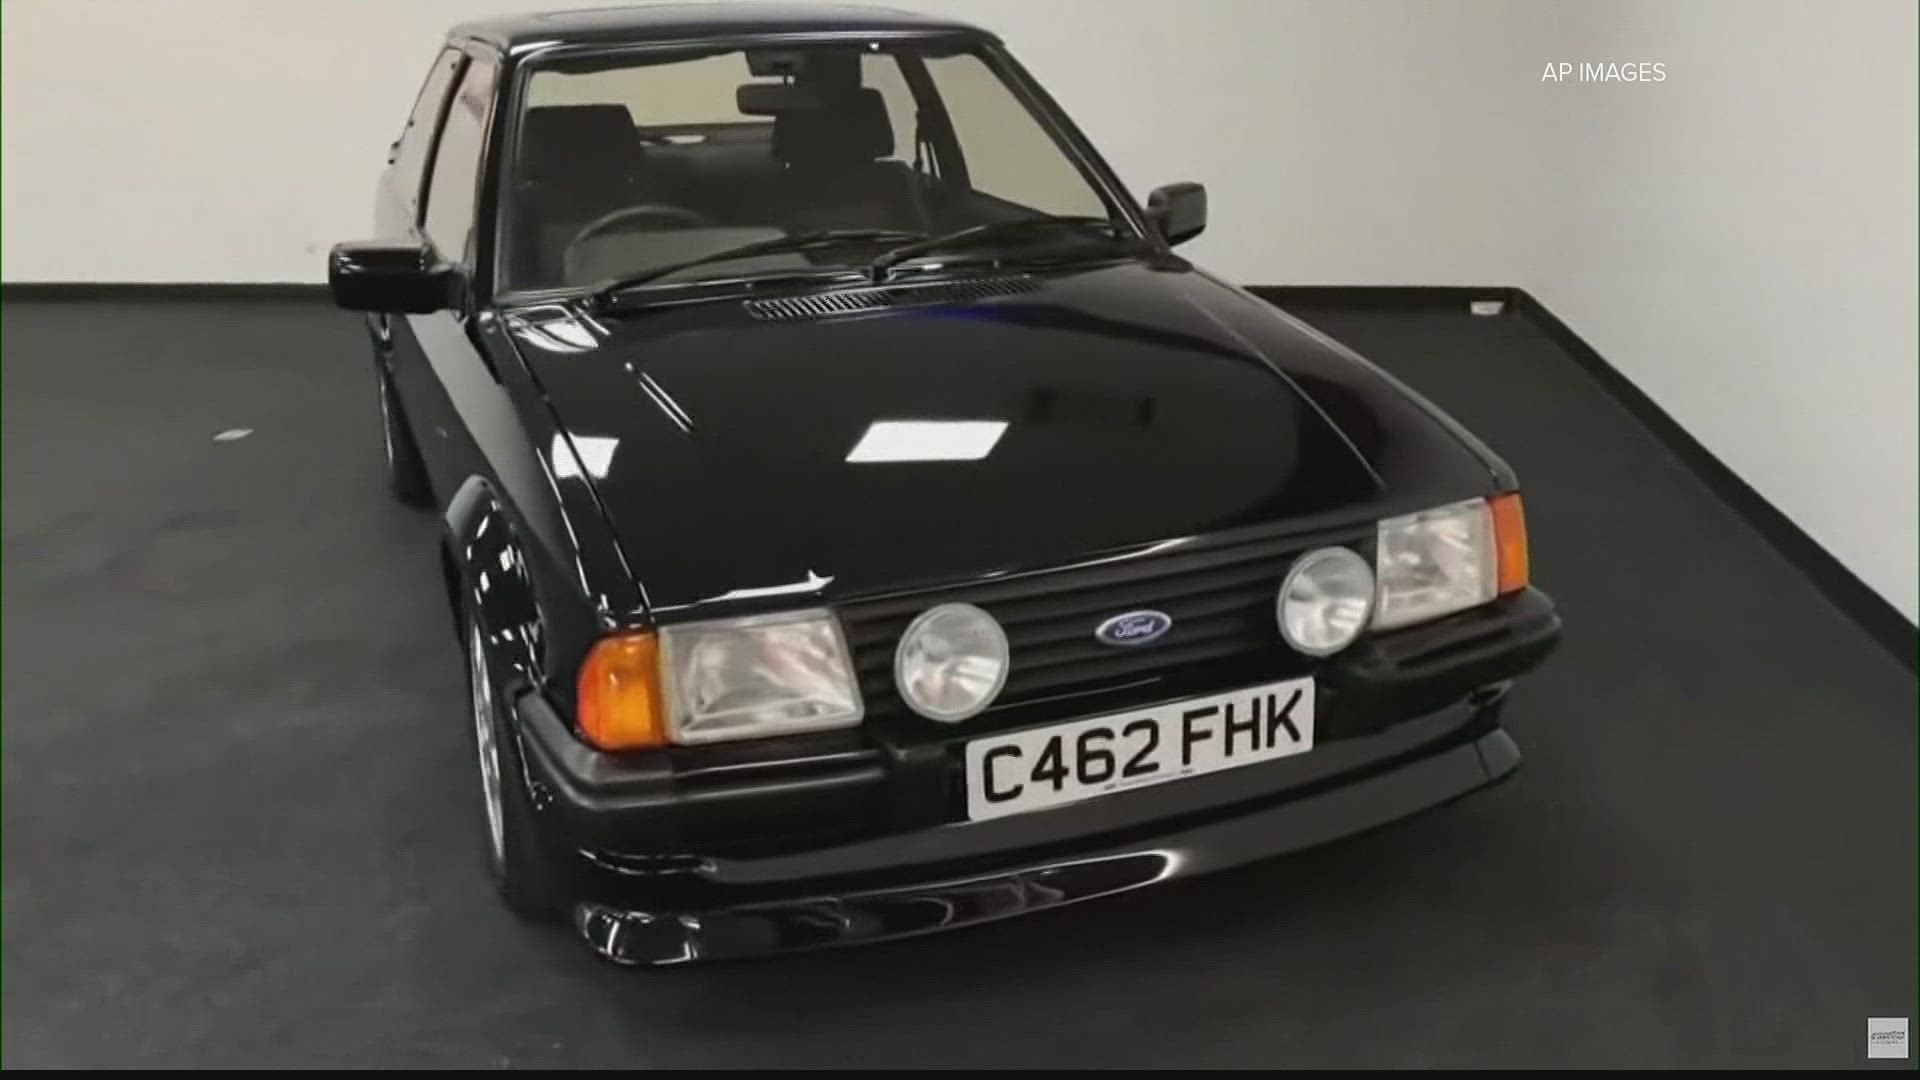 Silverstone Auctions said there was “fierce bidding” for the black Ford Escort RS Turbo before the sale closed.